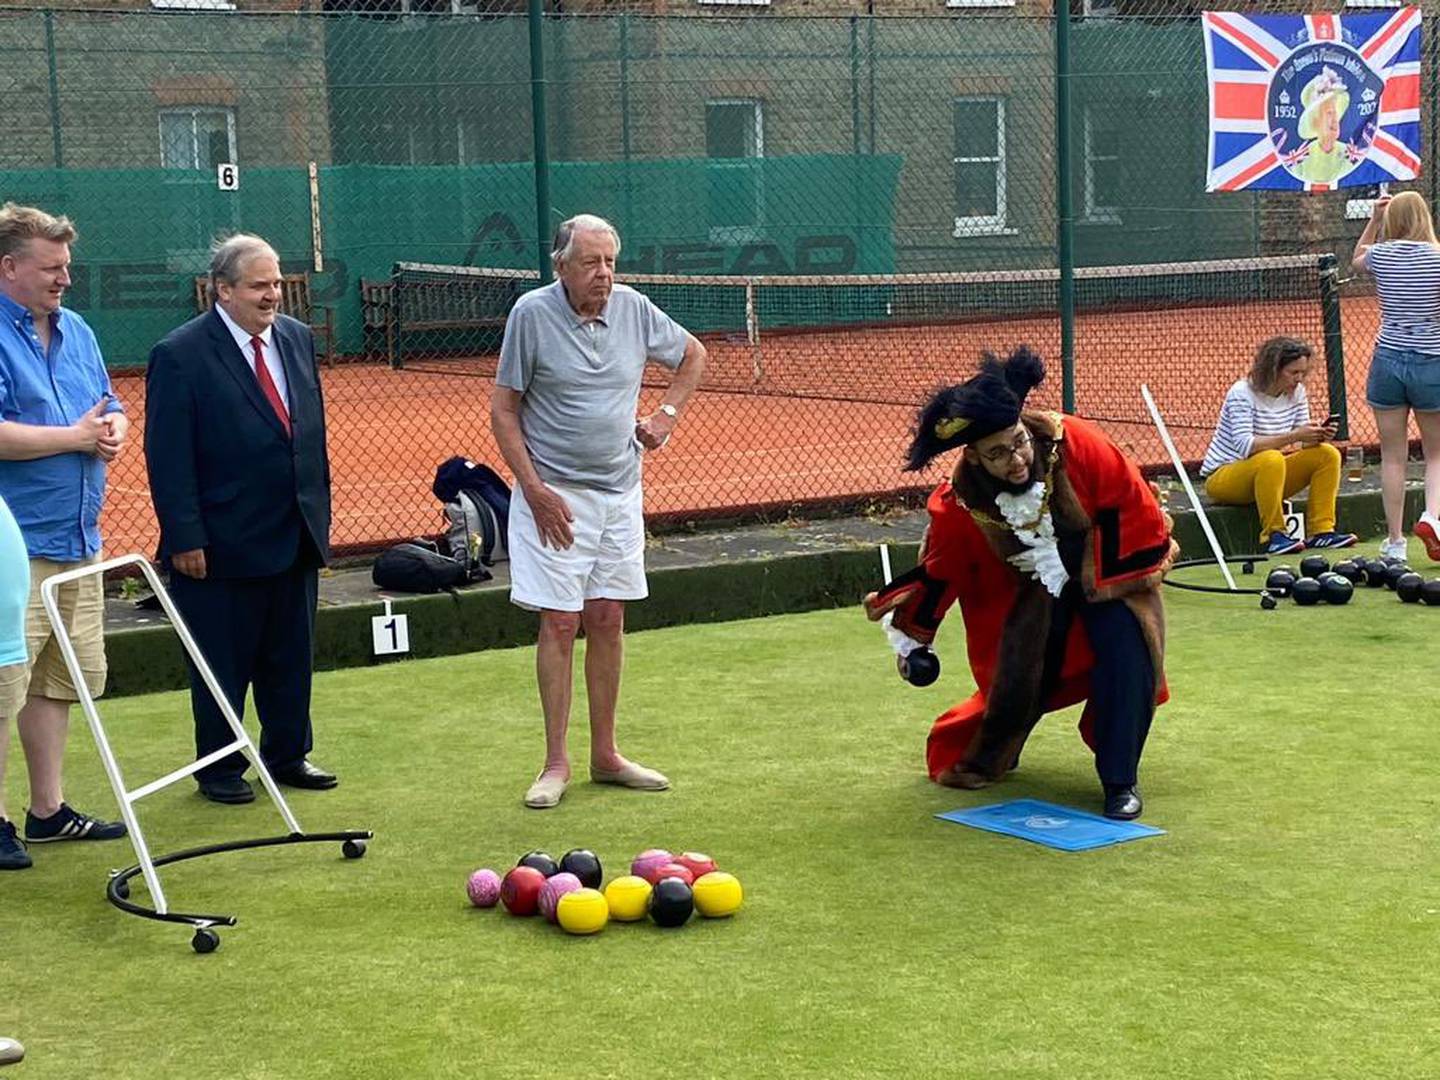 Taouzzale, above playing lawn bowls with members of the Paddington Sports Club, has made it his mission to attend as many events as possible in his 12-month tenure. Ninety-three or so days in, the tally stands at almost 300. Photo: Westminster City Council